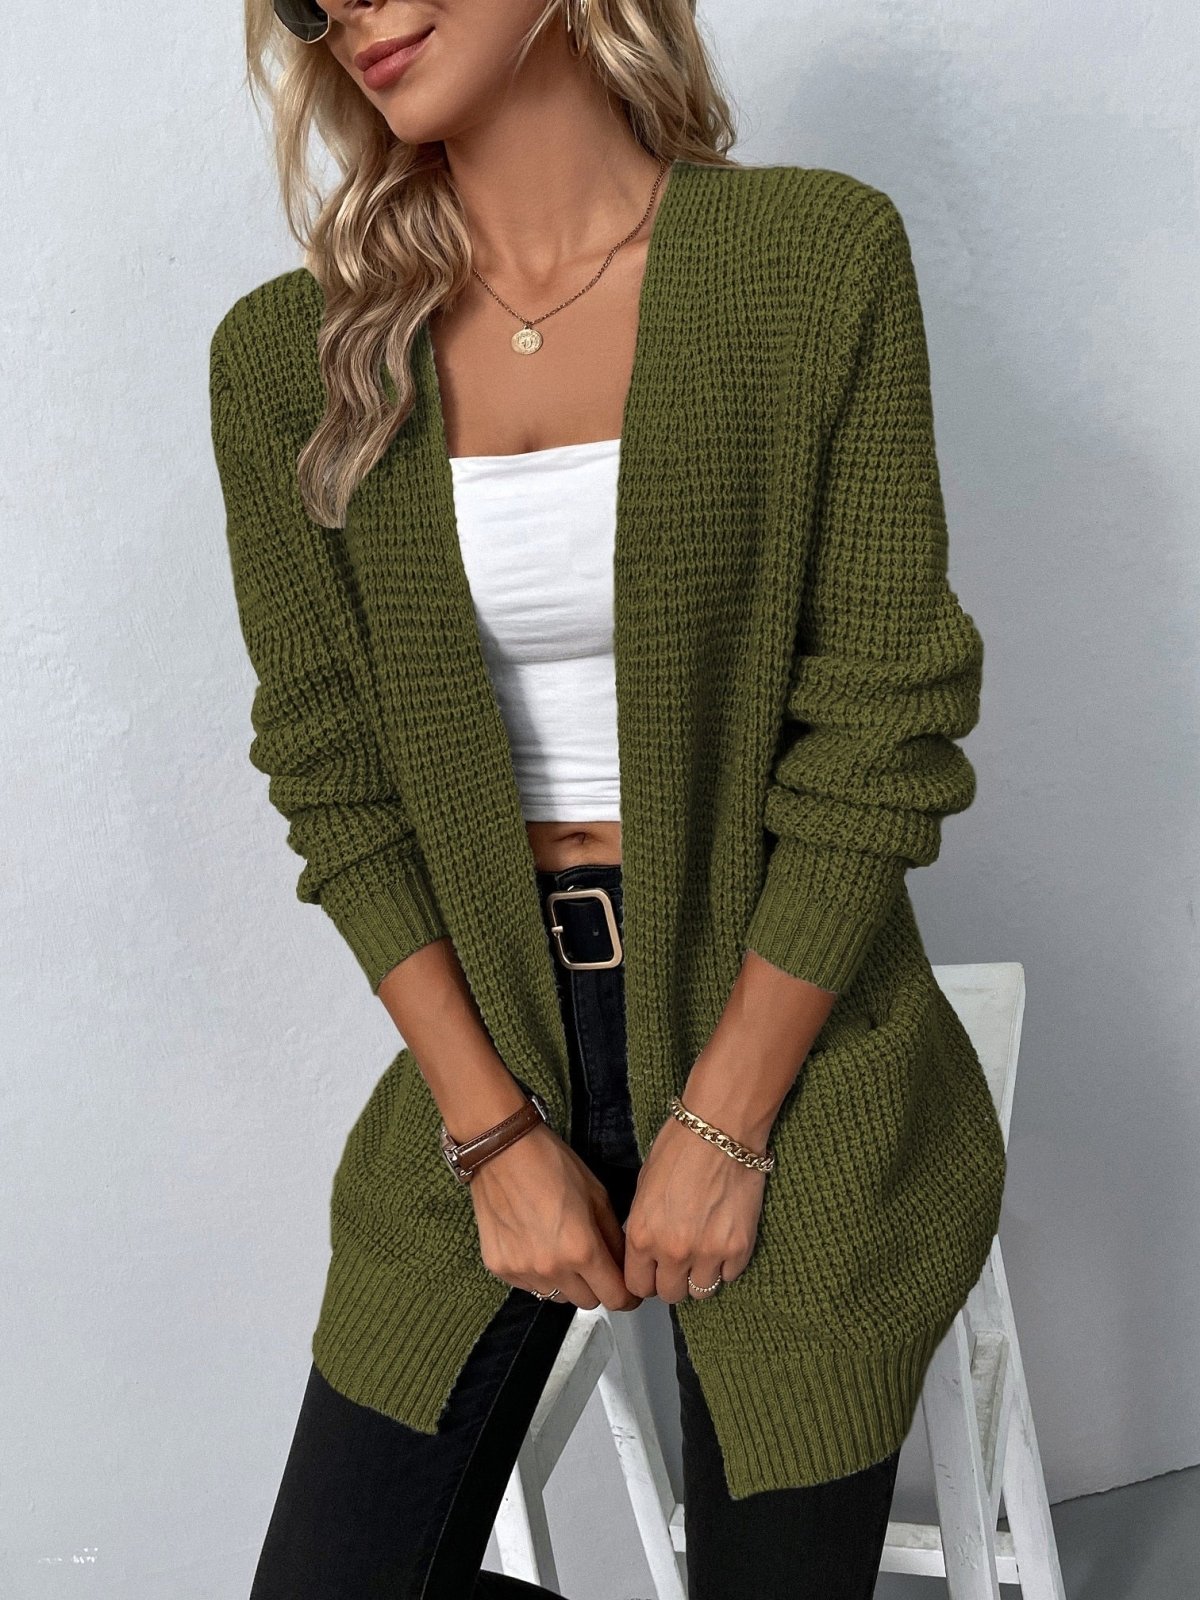 Irraine - knitted cardigan